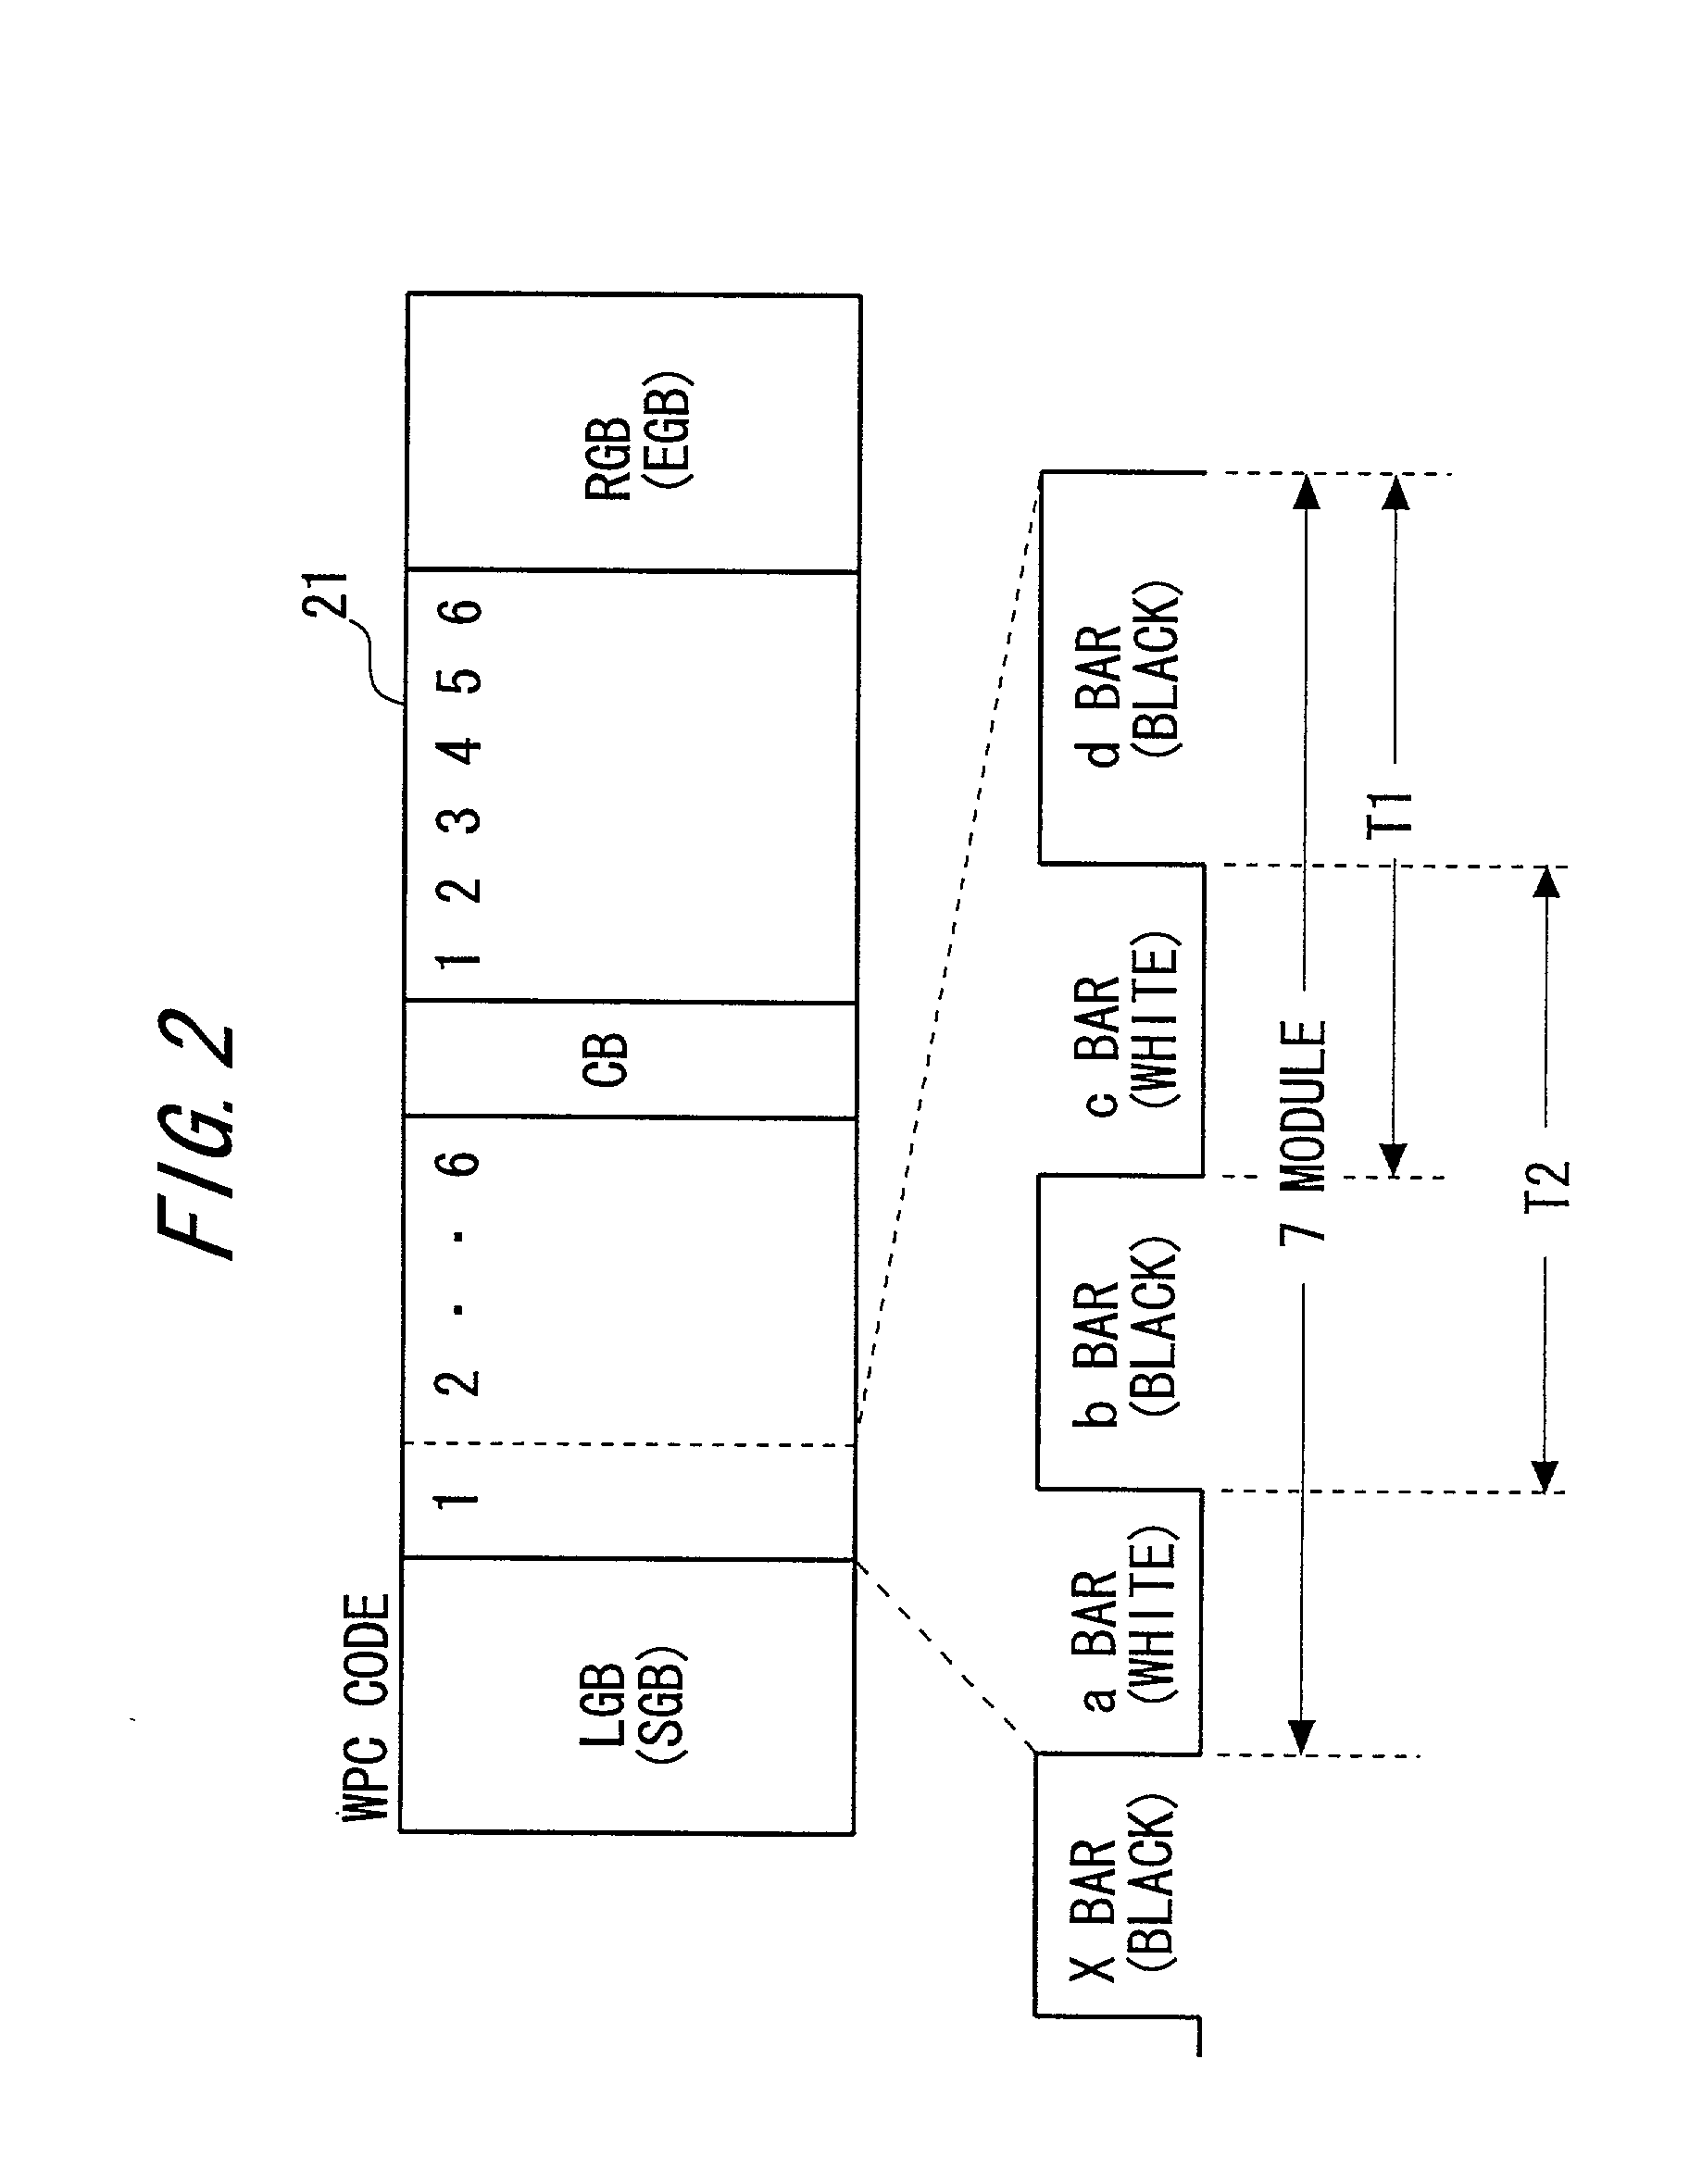 Apparatus and method for correcting bar width, bar code reader, and method for decoding bar code